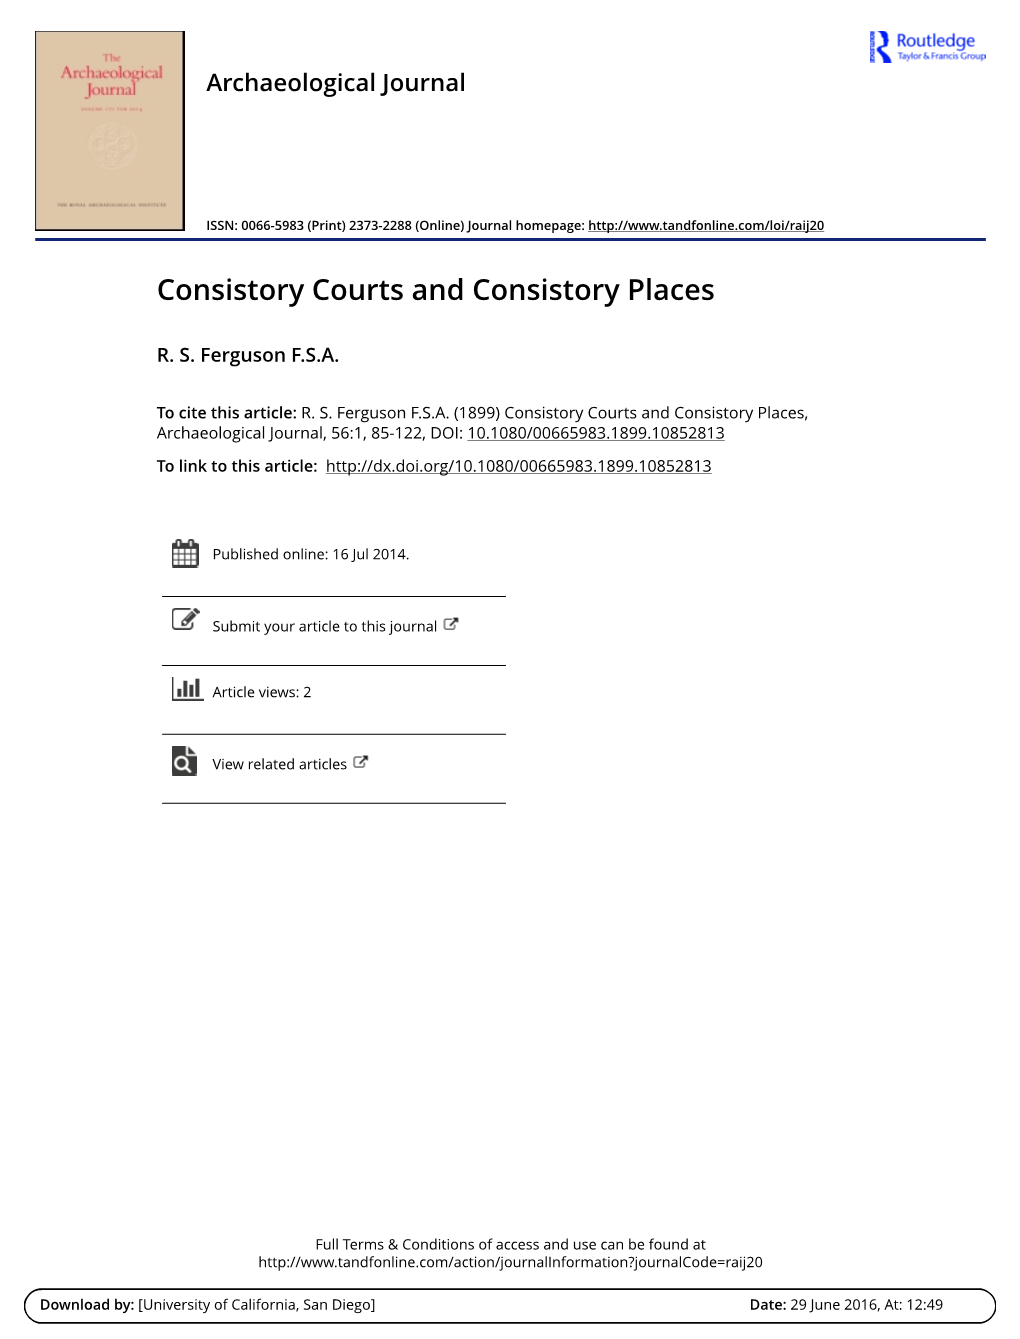 Consistory Courts and Consistory Places